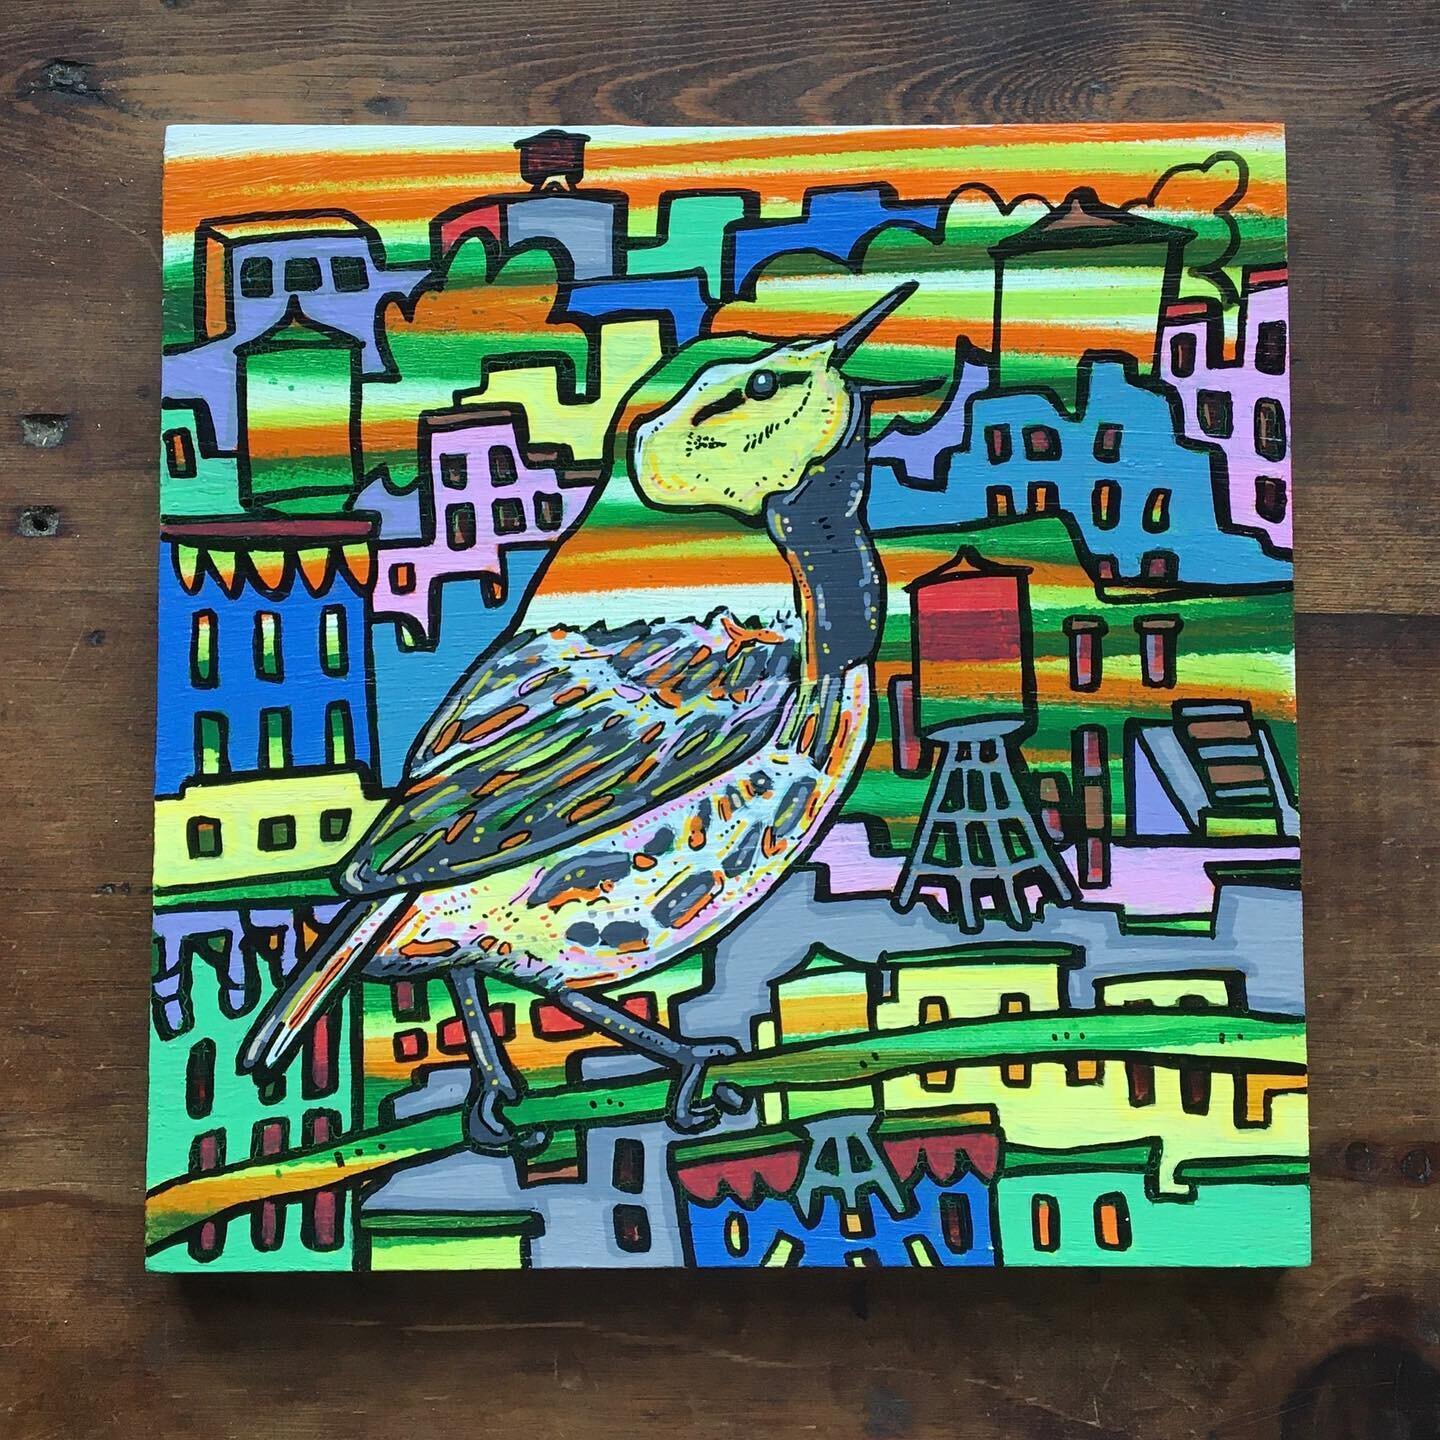 NYC Warbler
10x10 / Acrylic on Wood Panel
$95

15% goes to PS11 Afterschool Art Programs @ps11programs in Chelsea
Commissions welcome. Can ship anywhere. DM me or go to http://www.georgesewell.com

#keepcalmandcarryon
#fundraiser
#kidsarttherapy
#ps1